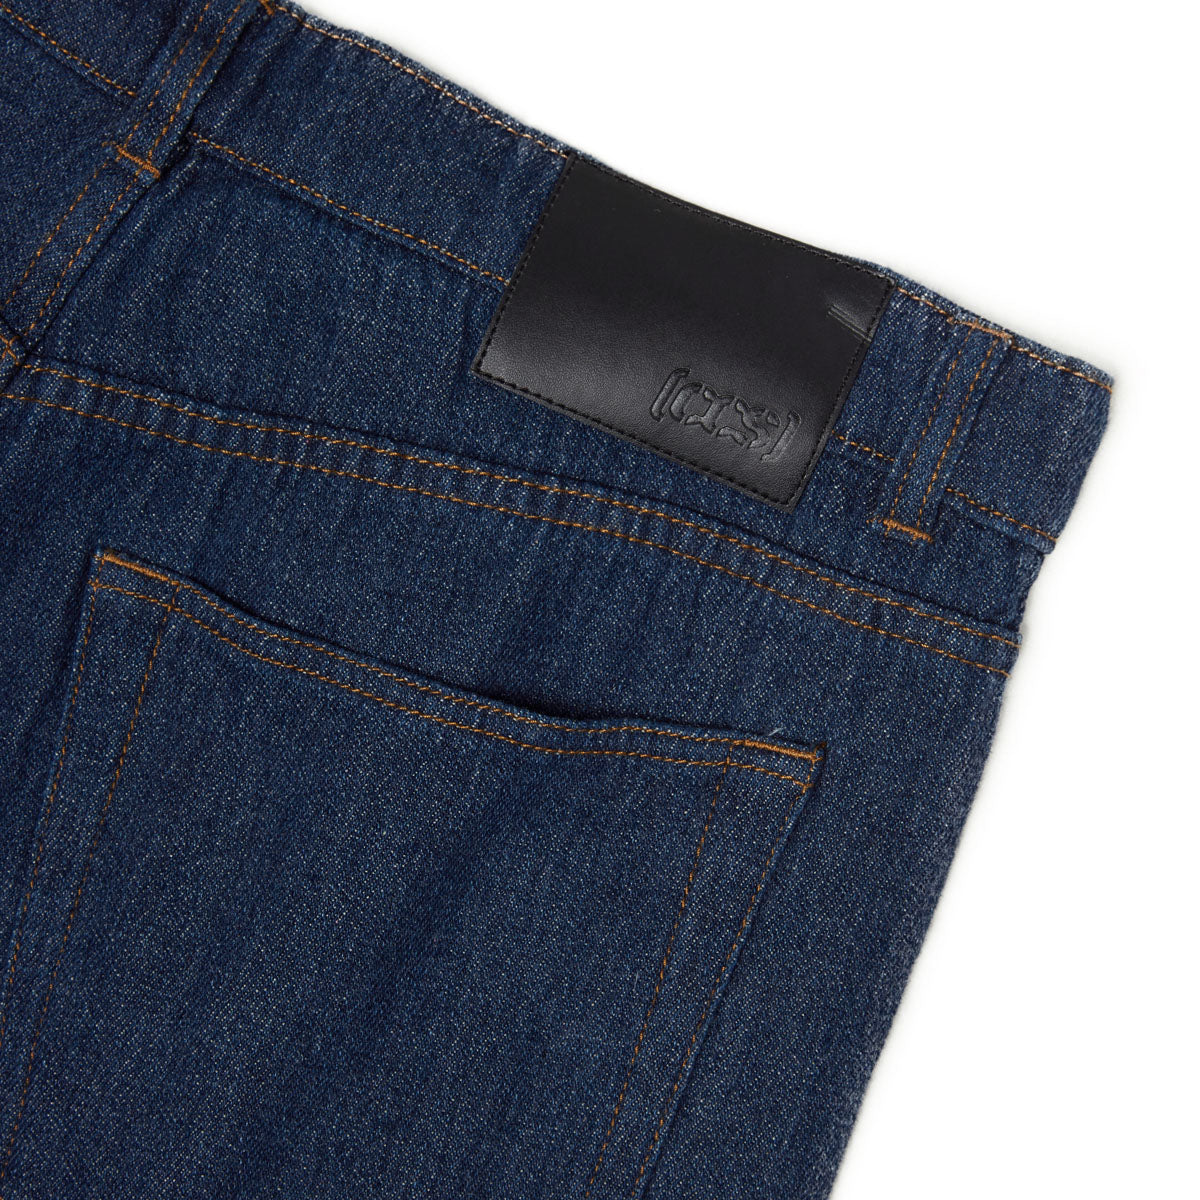 CCS Standard Plus Relaxed Denim Jeans - Raw image 4